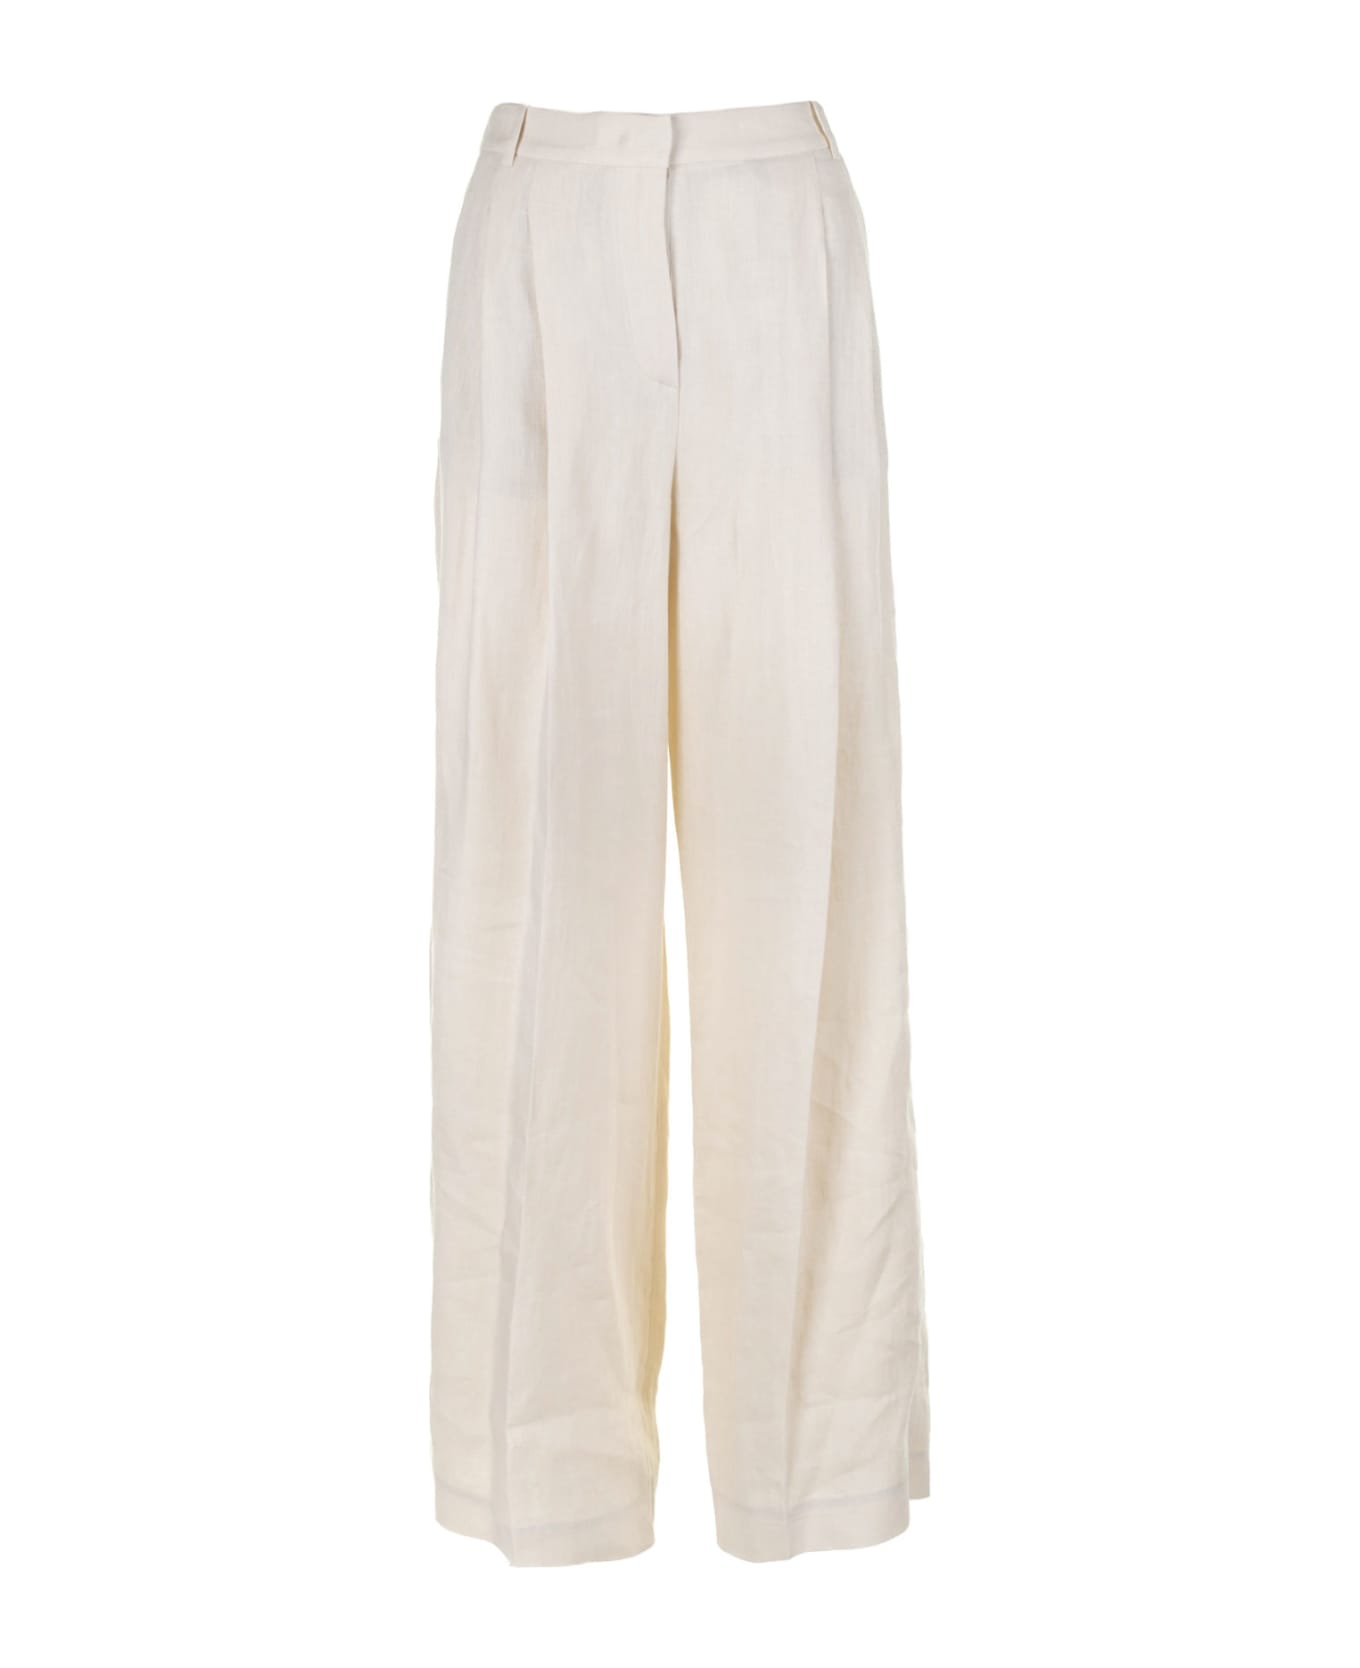 Eleventy High-waisted Linen Trousers - SABBIA ボトムス